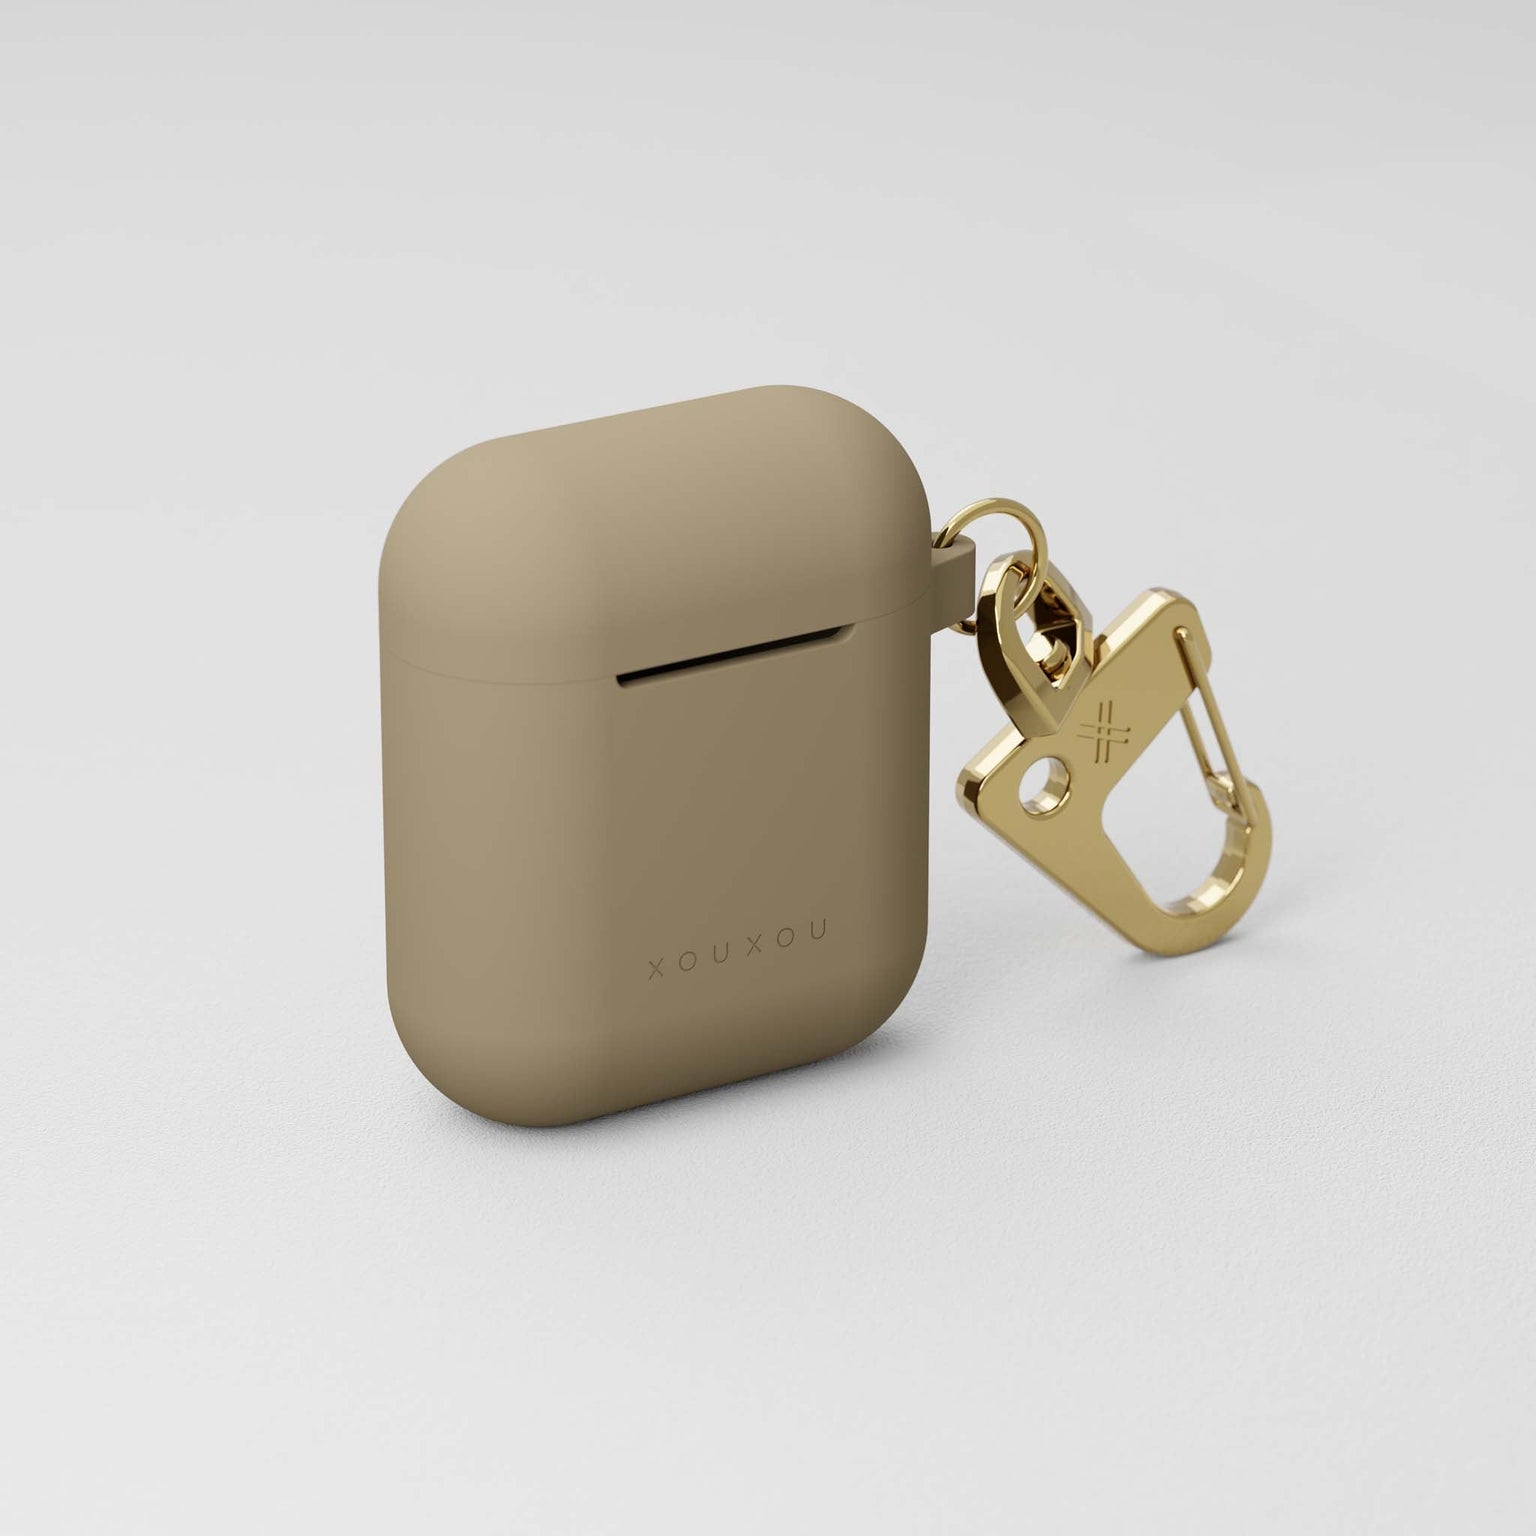 First and Second gen. AirPods case in Taupe (Beige) soft-touch and golden metal carabiner | XOUXOU